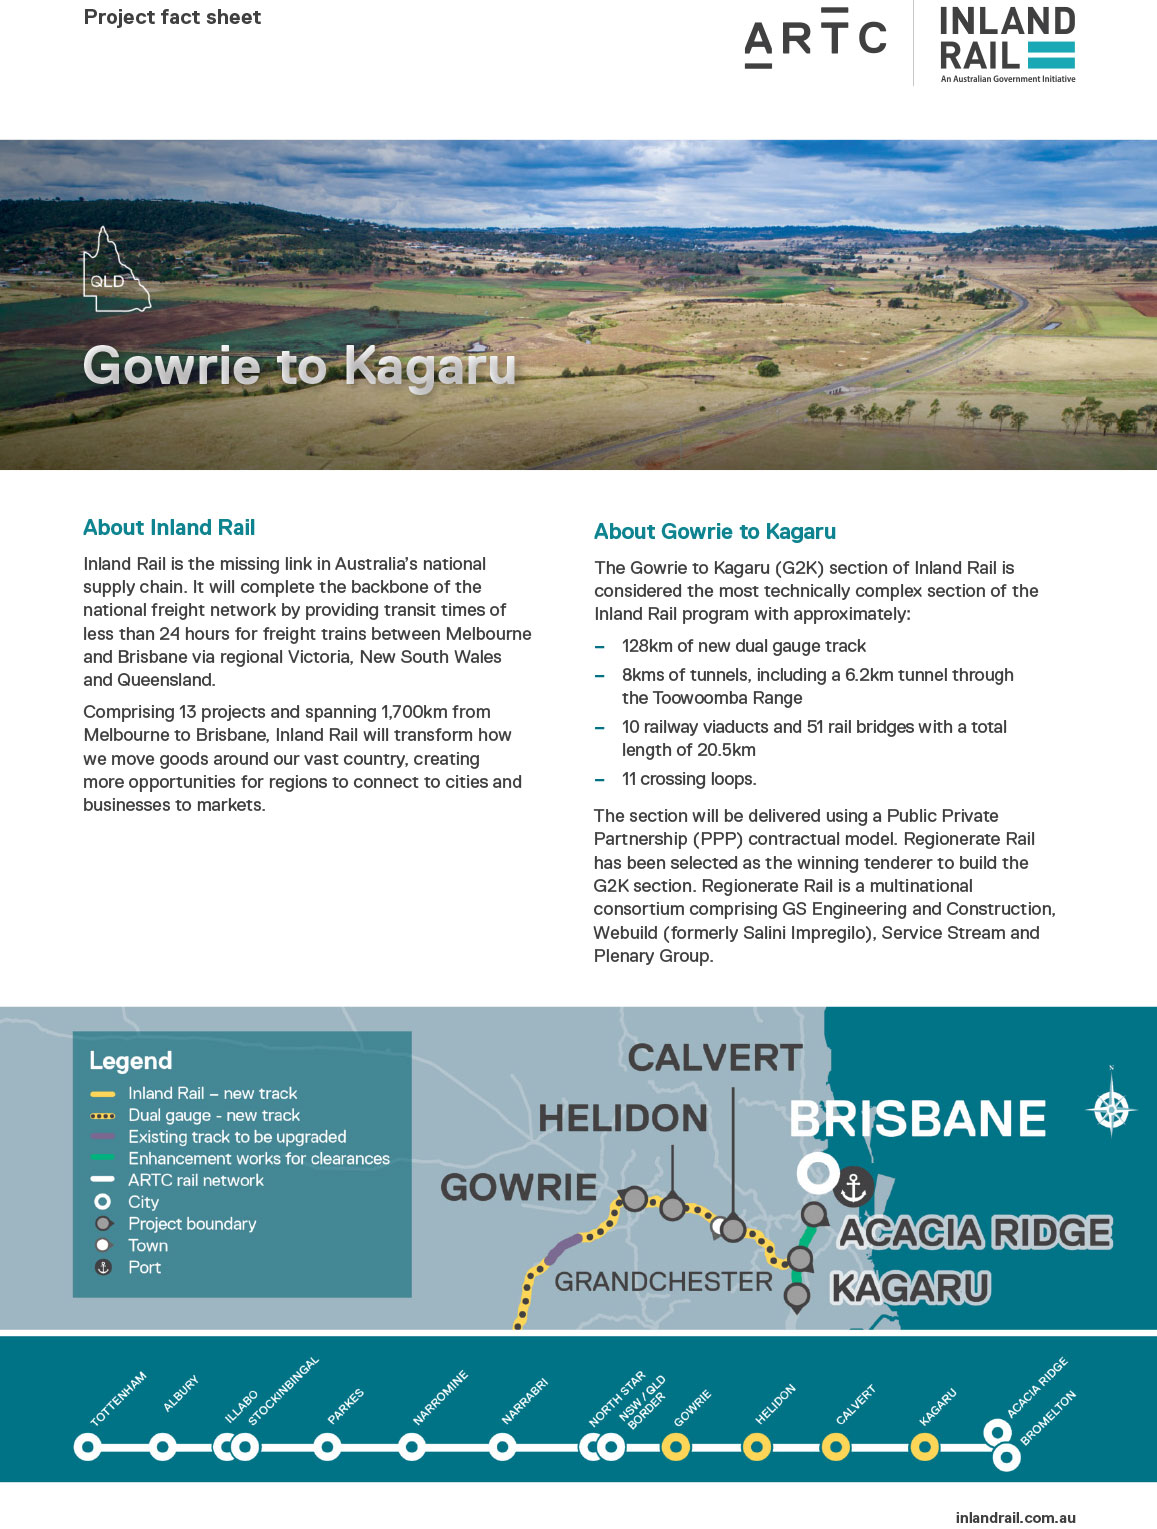 Image thumbnail for Gowrie to Kagaru section fact sheet